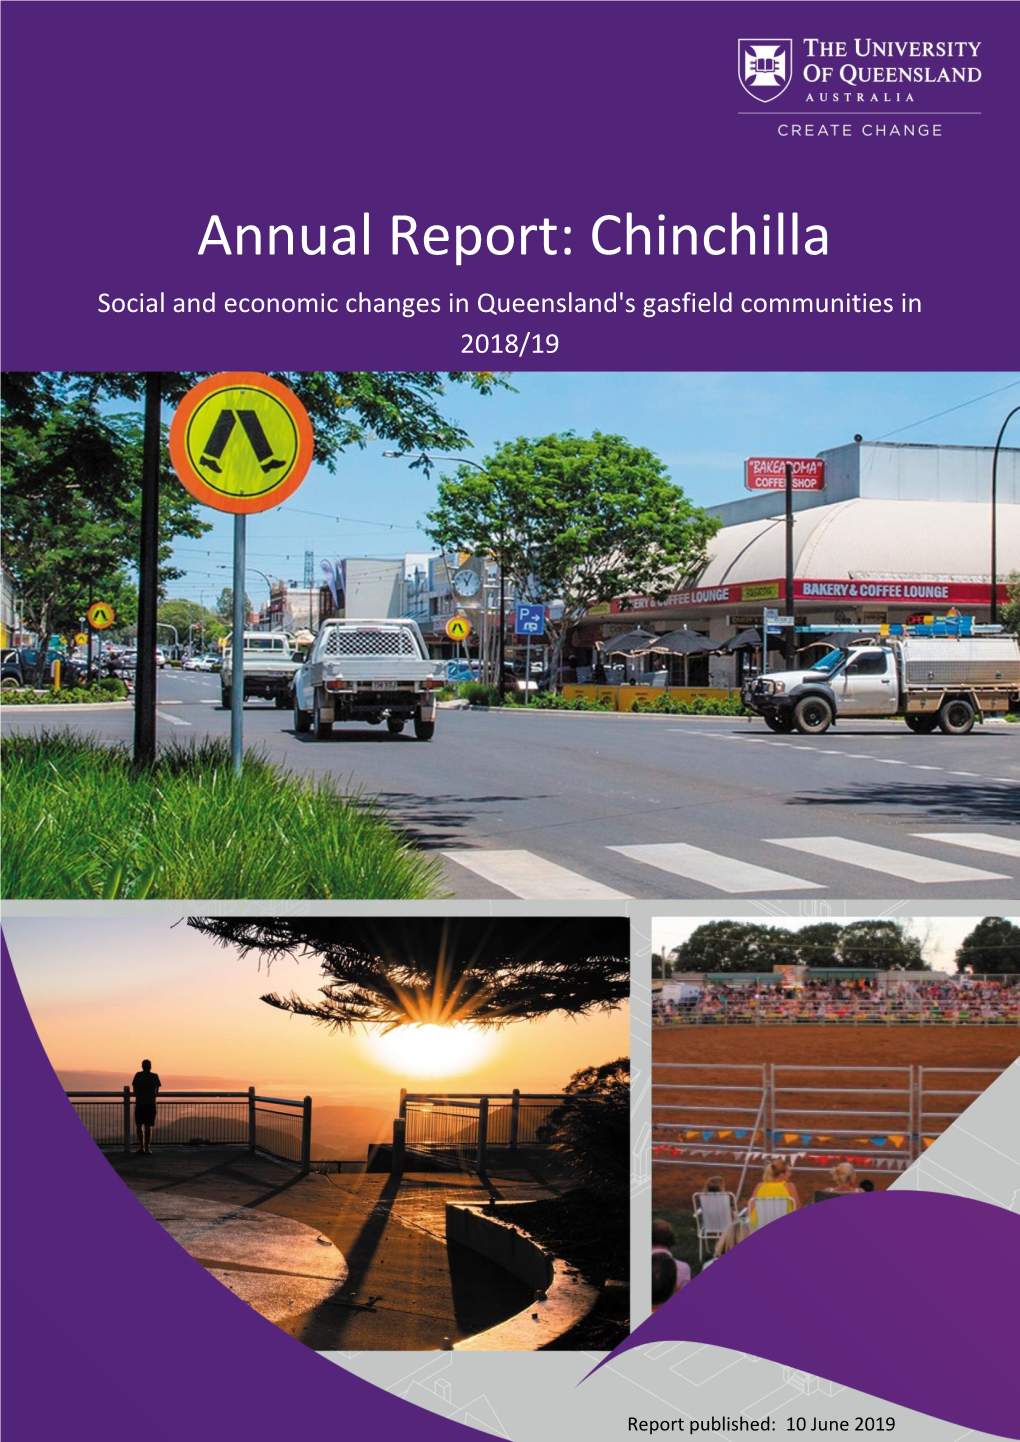 Annual Report: Chinchilla Social and Economic Changes in Queensland's Gasfield Communities in 2018/19